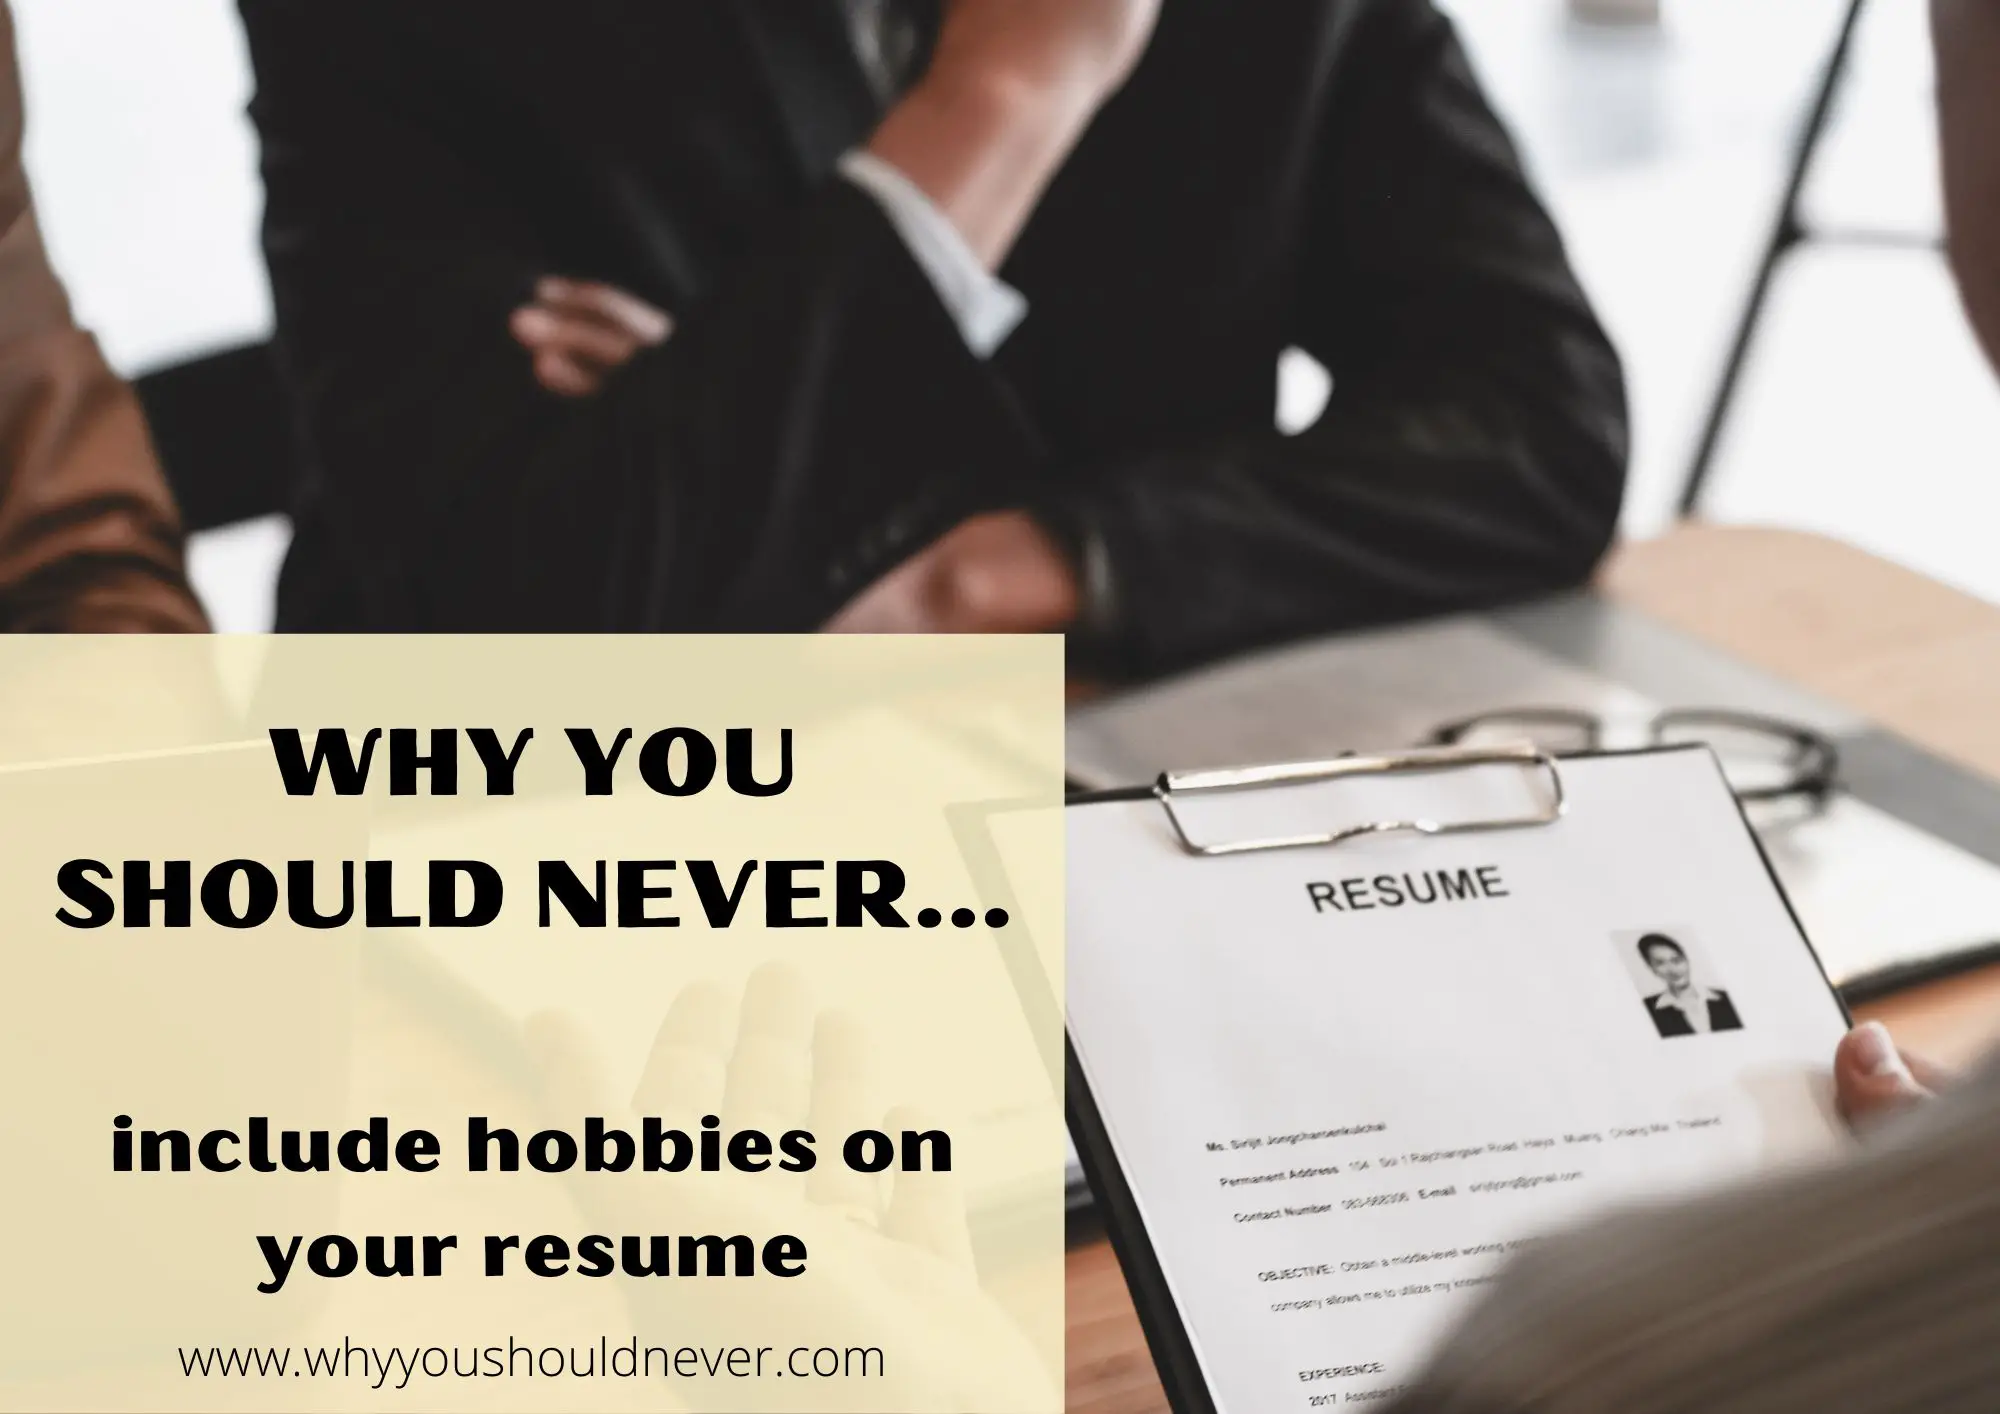 Why You Should Never Include Hobbies On Your Resume